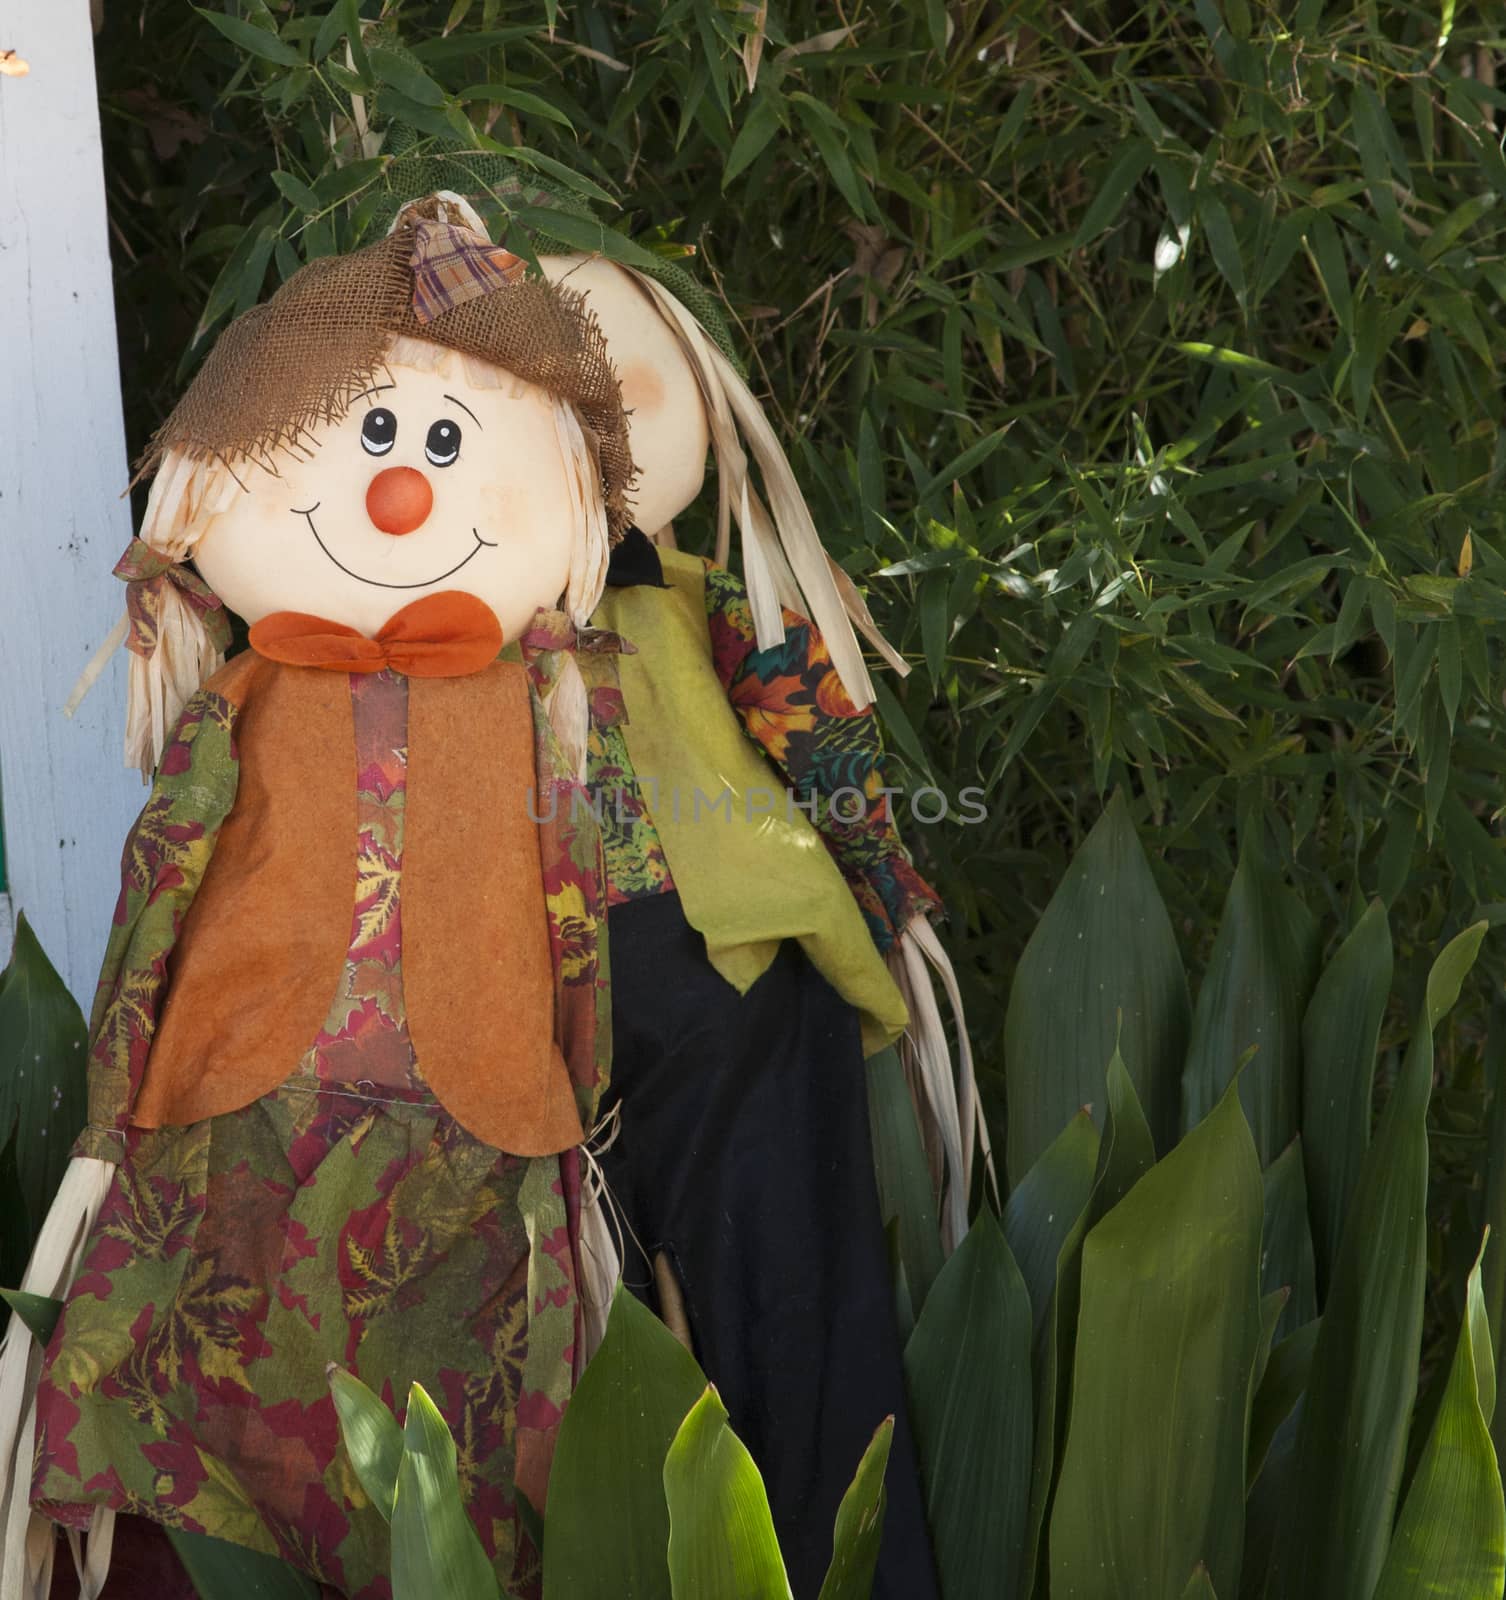 Brightly colored scarecrow hidden near green plants